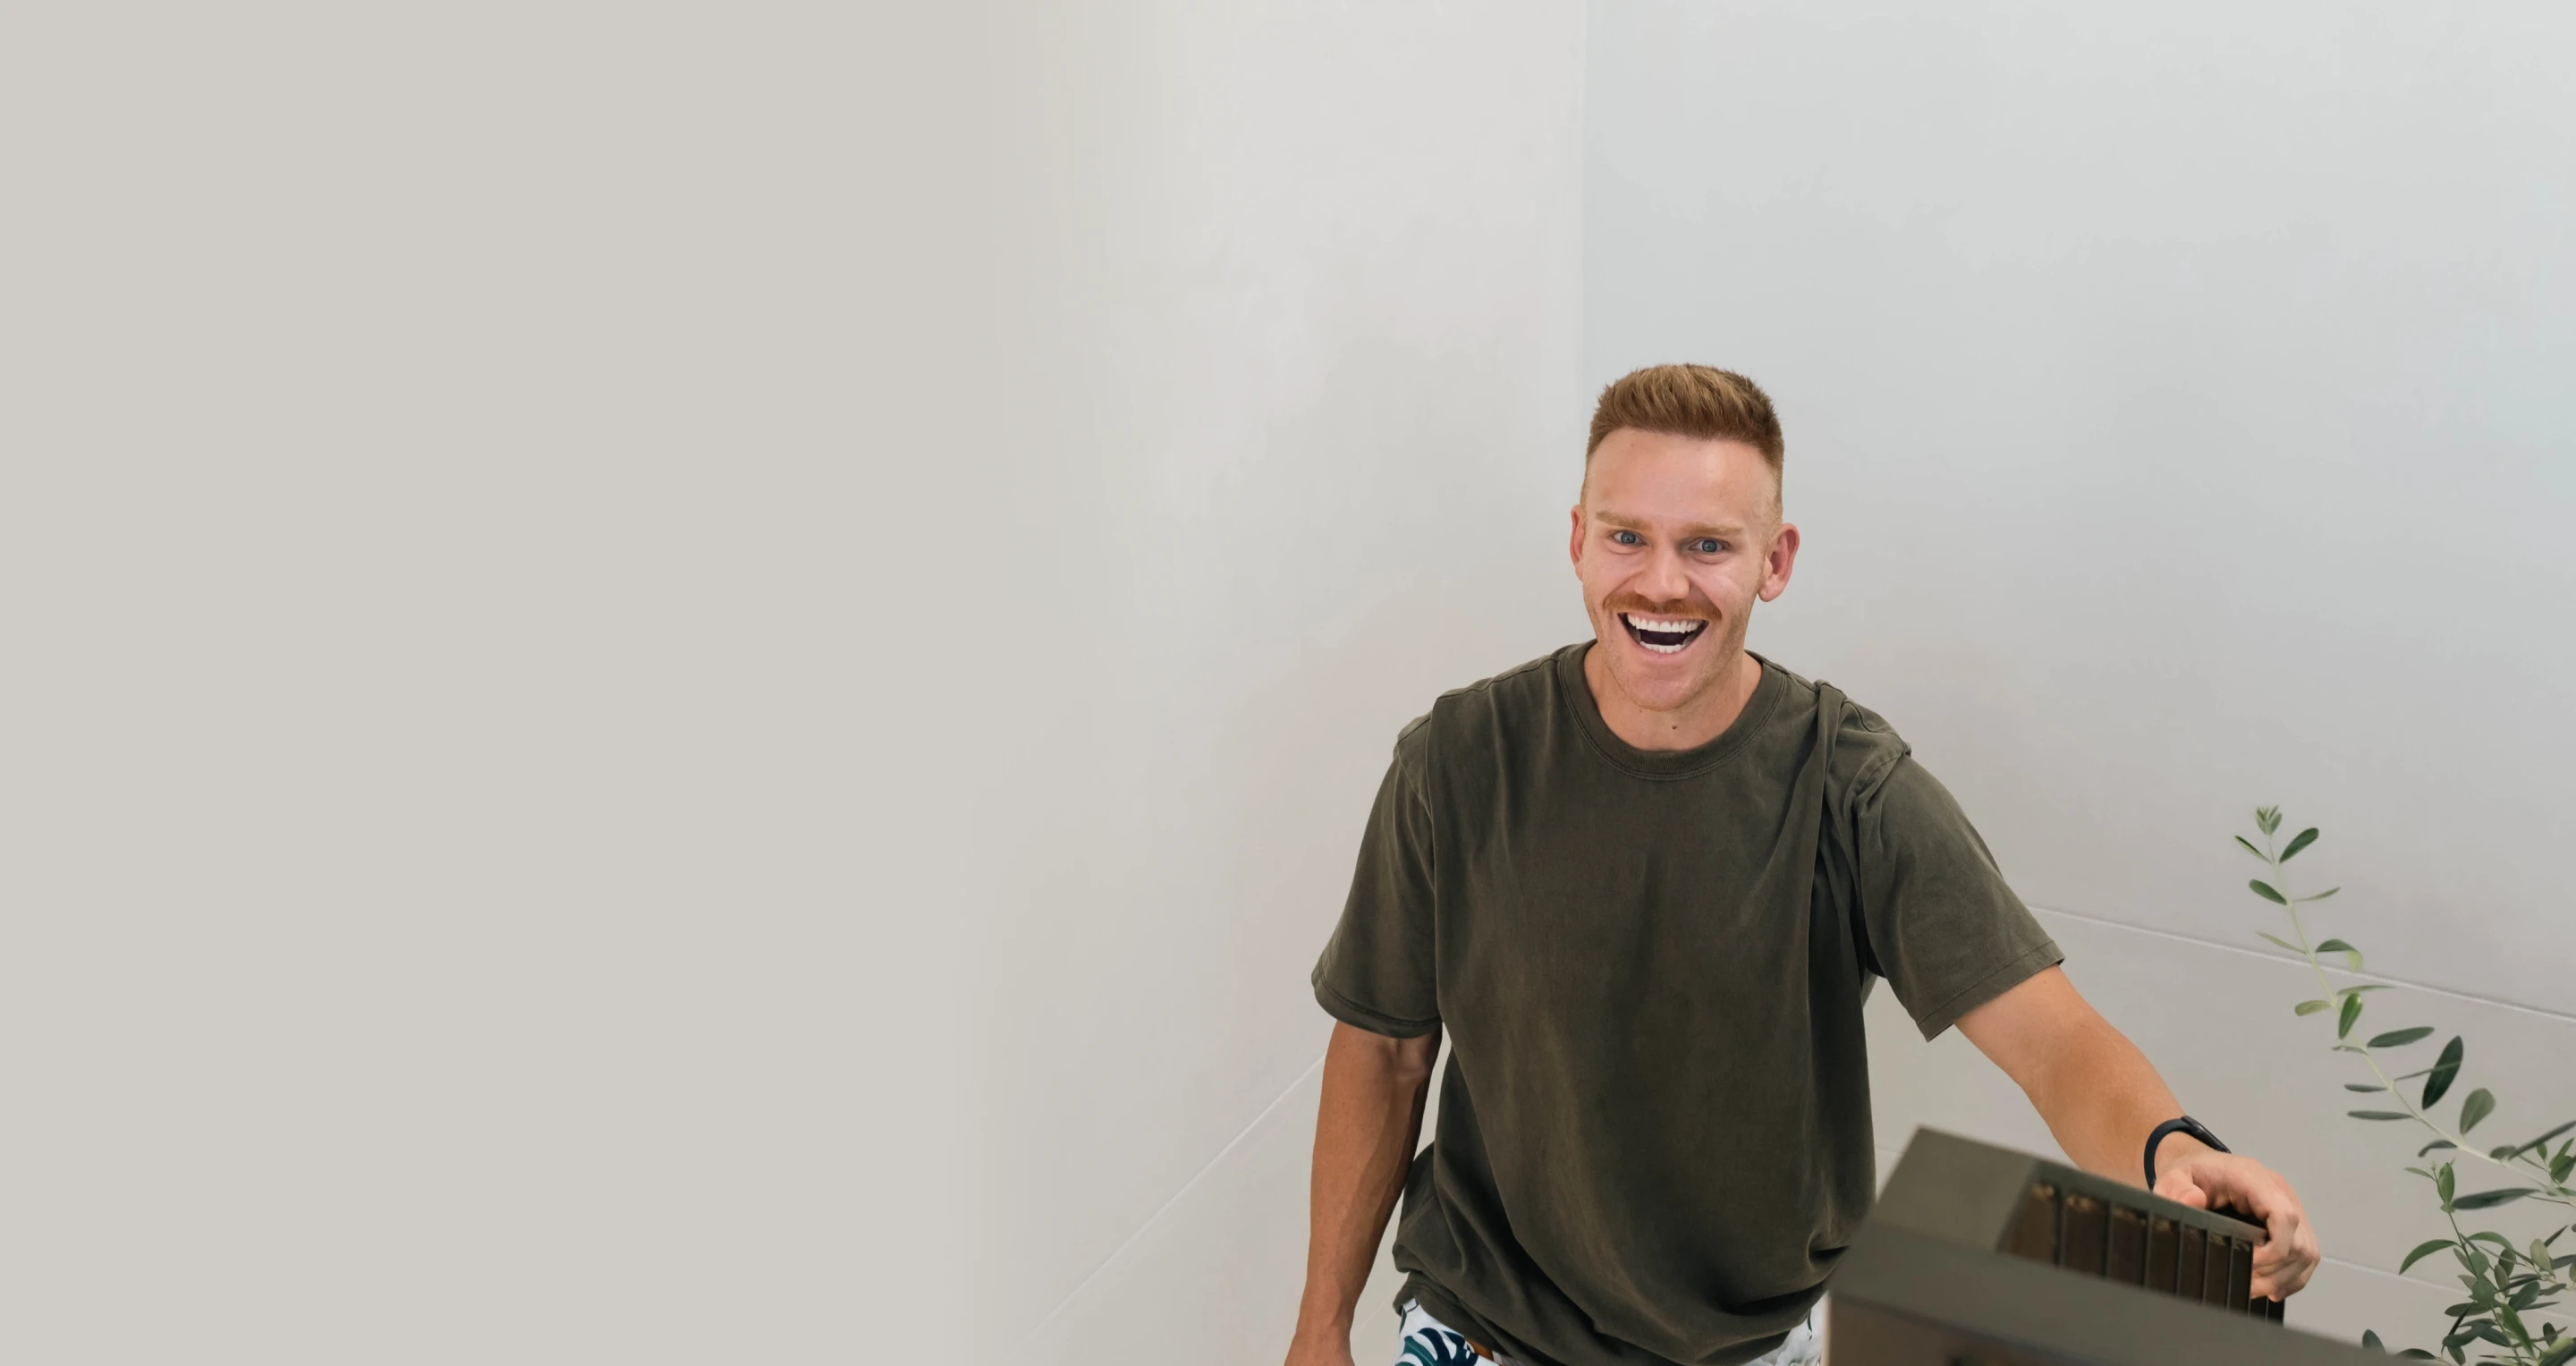 A smiling man with short hair and a mustache, wearing a dark t-shirt and patterned shorts, looking up while seated in a modern, minimalist indoor space. A potted plant is partially visible on the right side, and the background is a light gray.